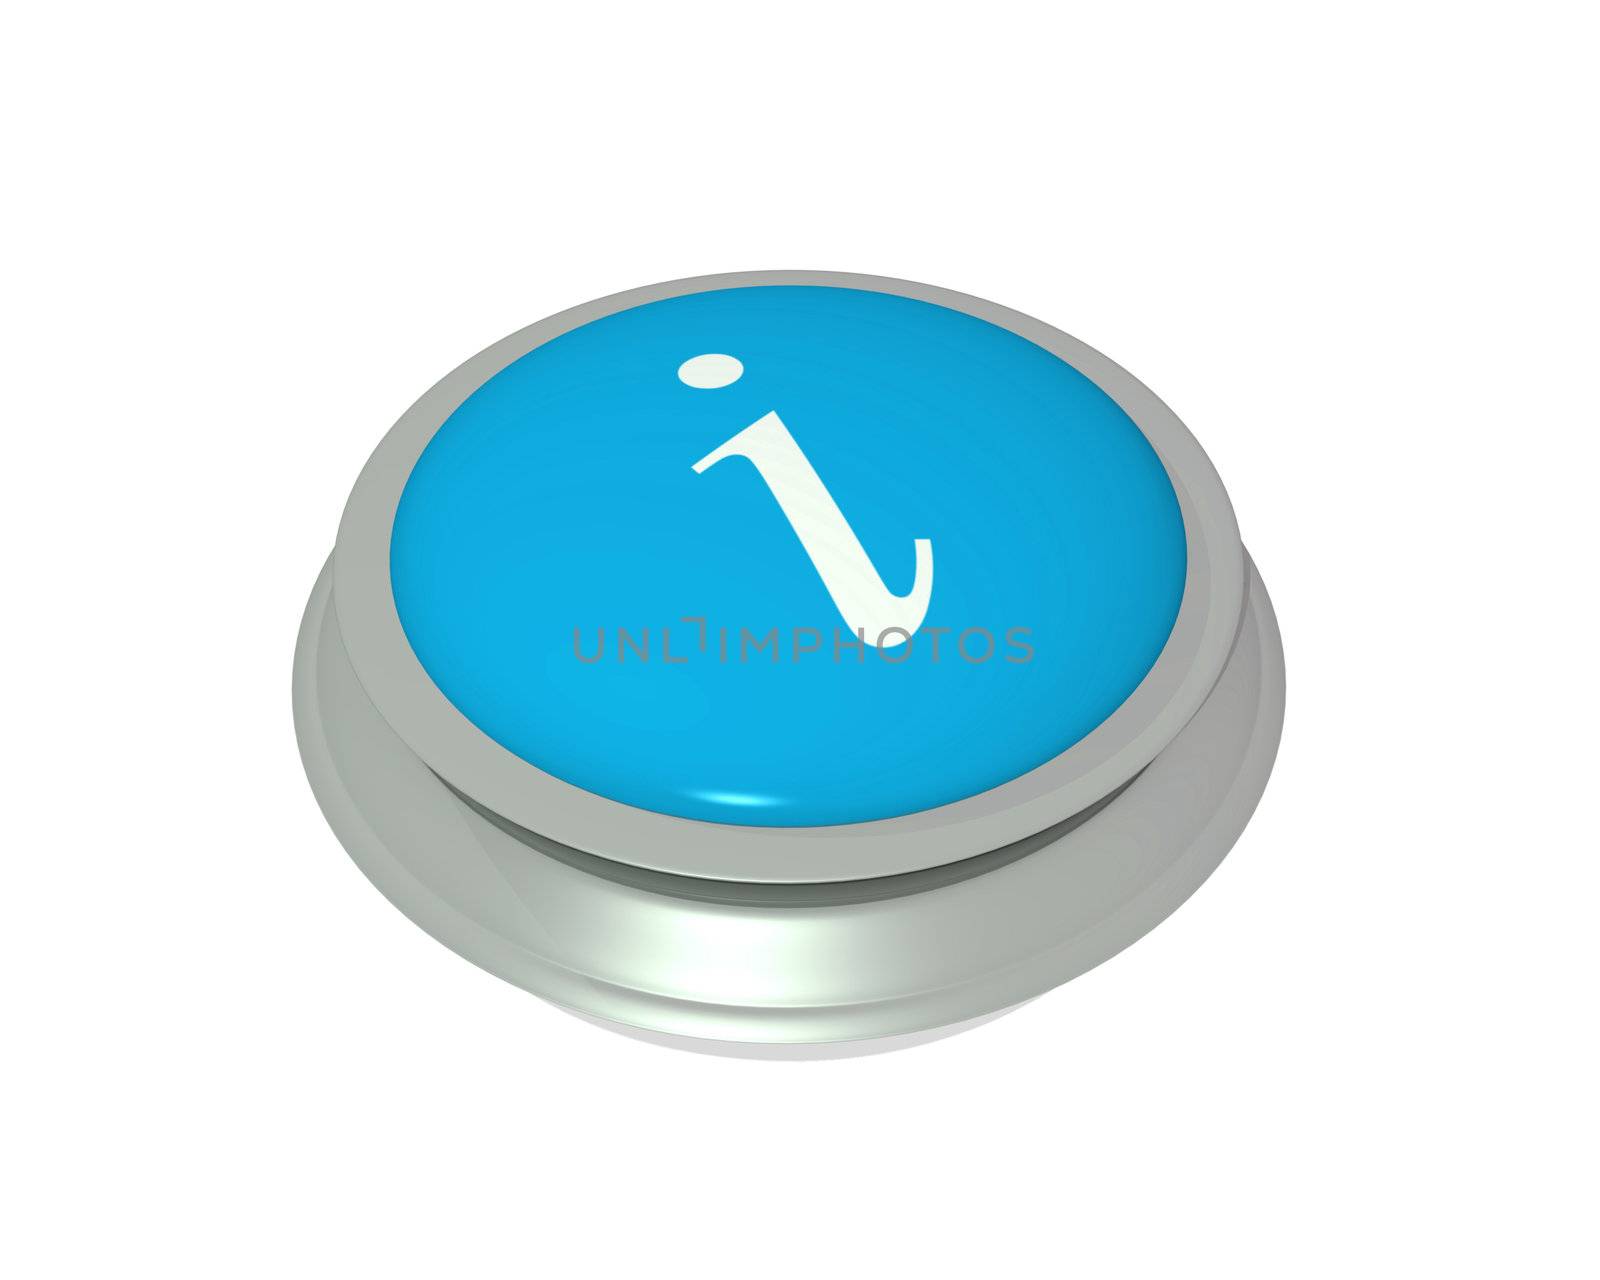 Image of an information button isolated on a white background.